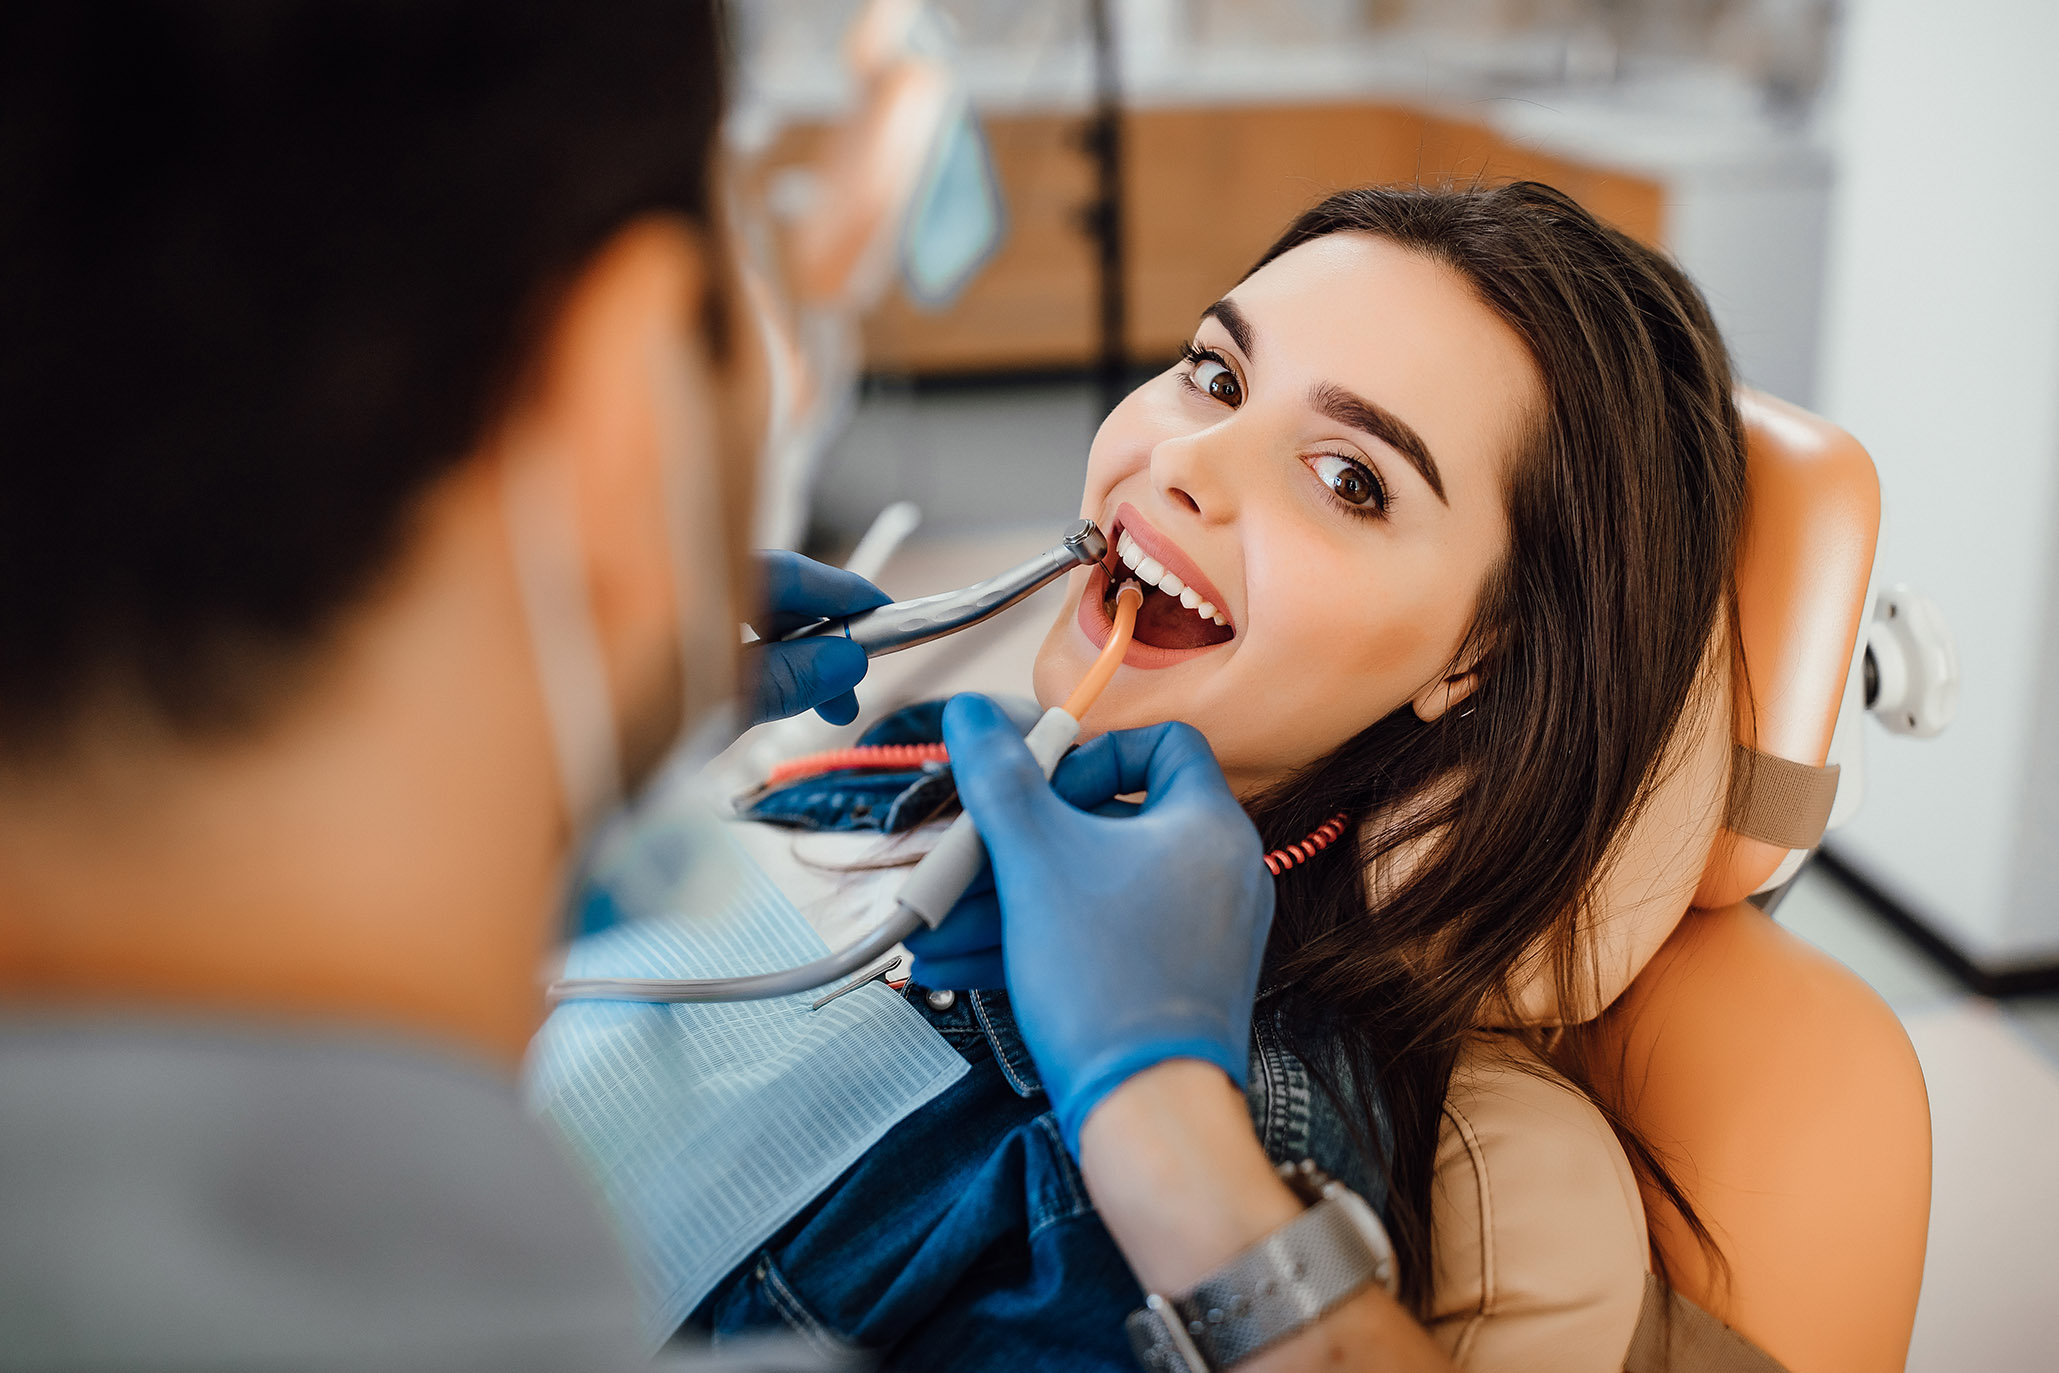 Young female patient visiting dentist office. Beautiful woman with healthy straight white teeth sitting at dental chair with open mouth during oral checkup while doctor working at teeth.